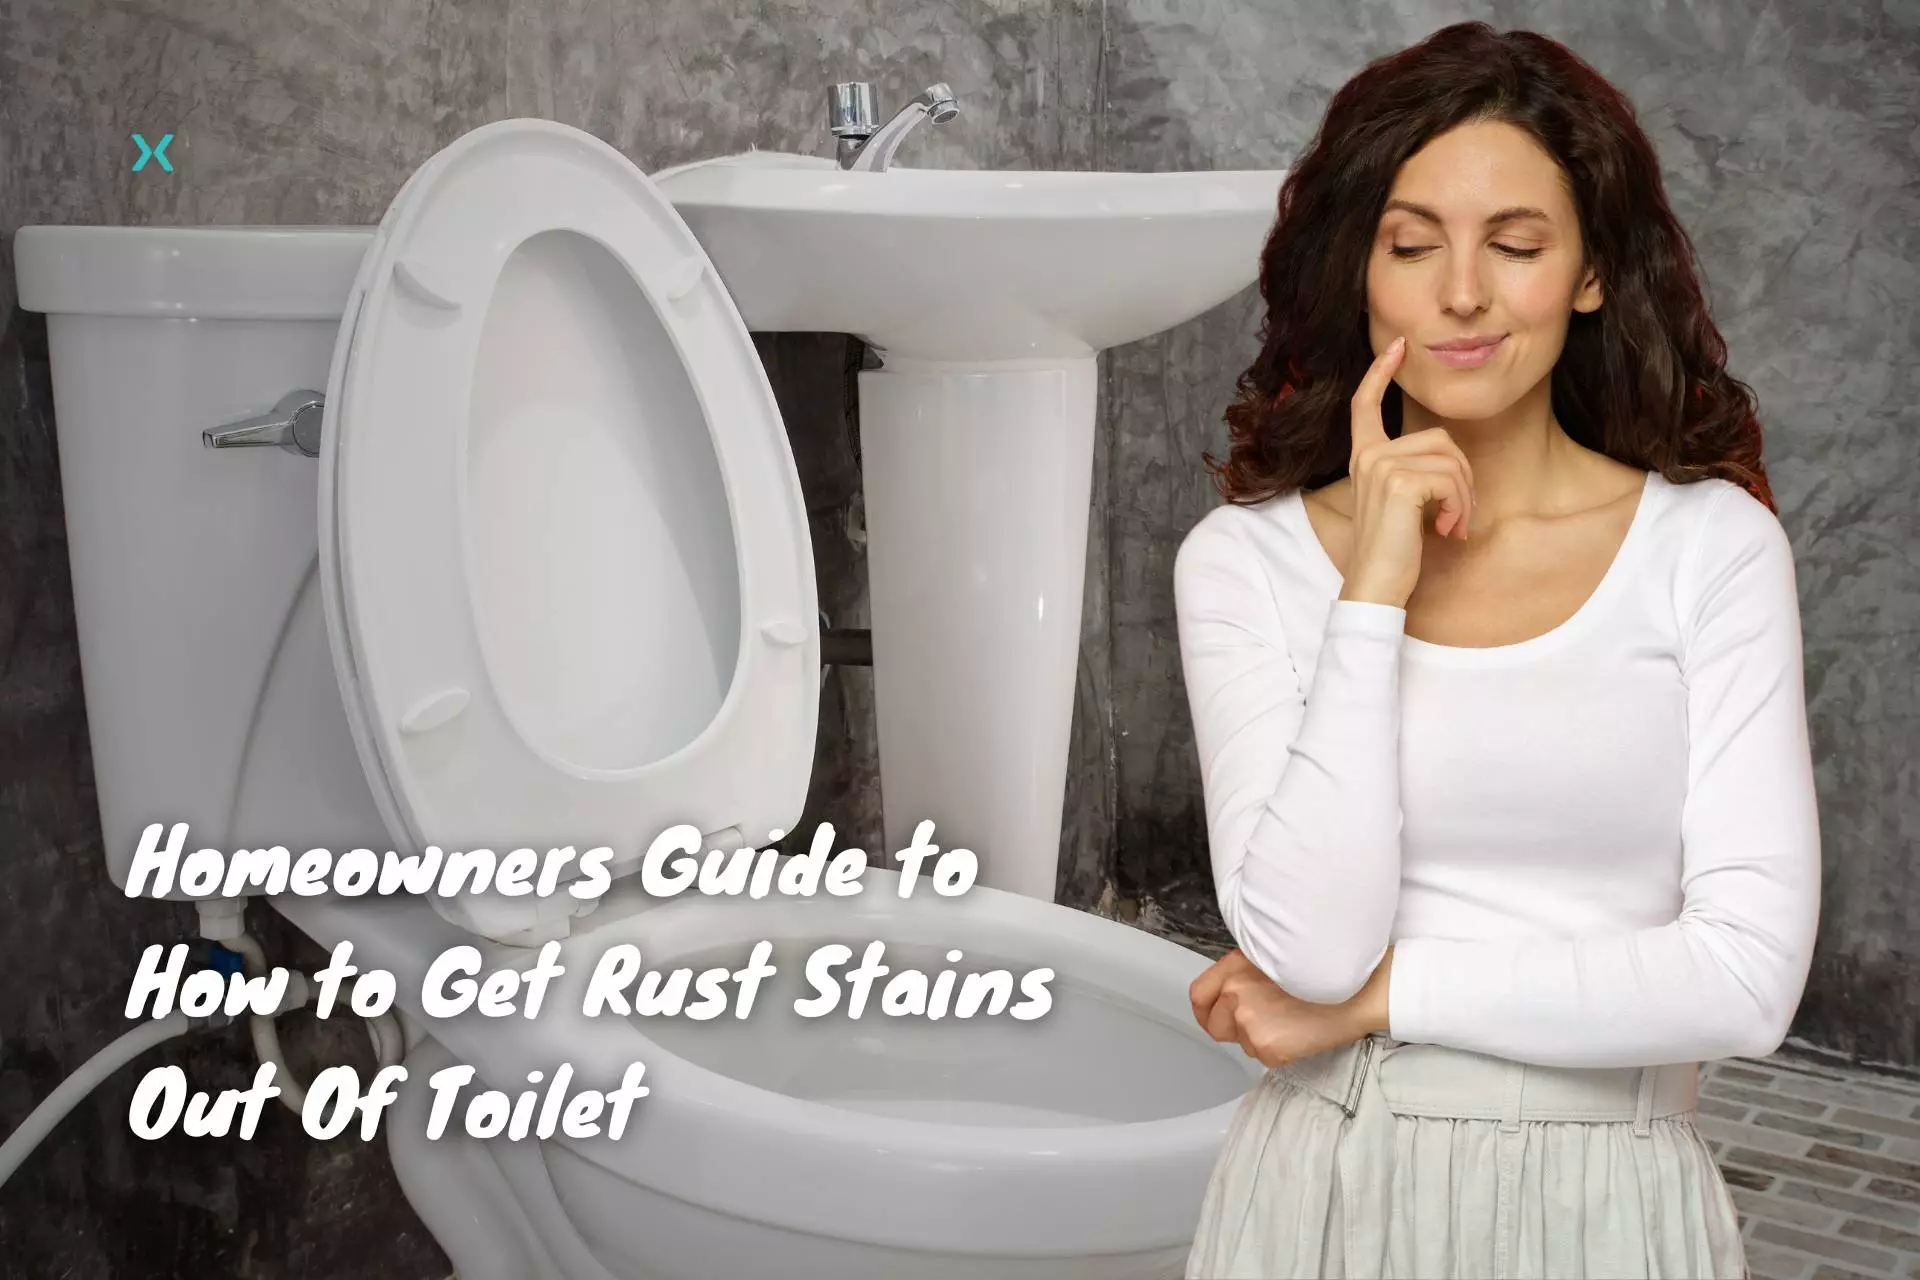 Homeowners Guide to How to Get Rust Stains Out Of Toilet